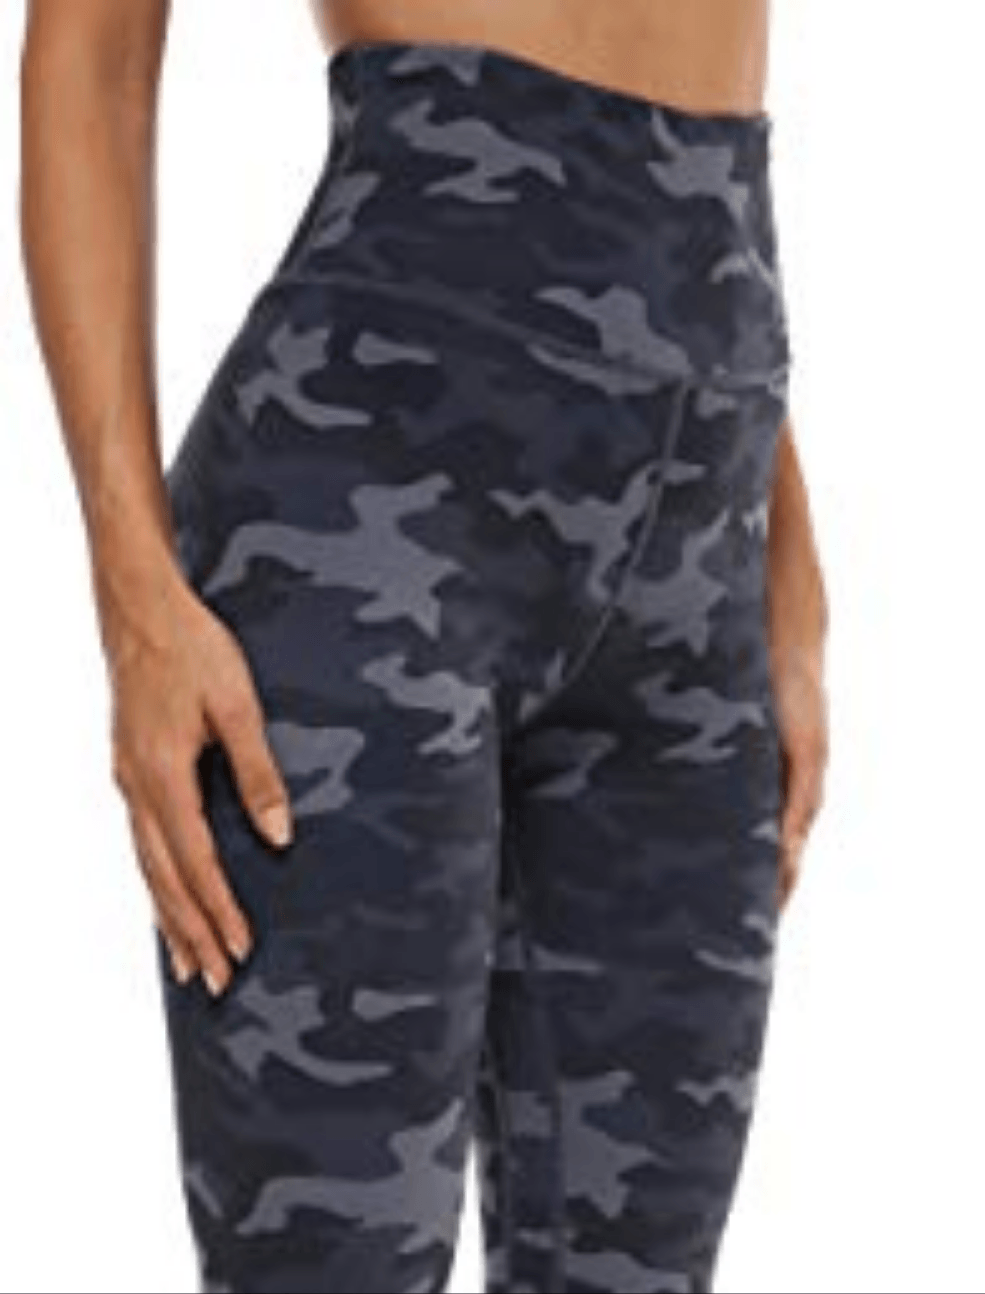 VOEONS Printed Yoga Pants for Women Camo Pattern Exercise Leggings with Pockets High Waisted Tummy Control Athletic Spandex Compression Leggings